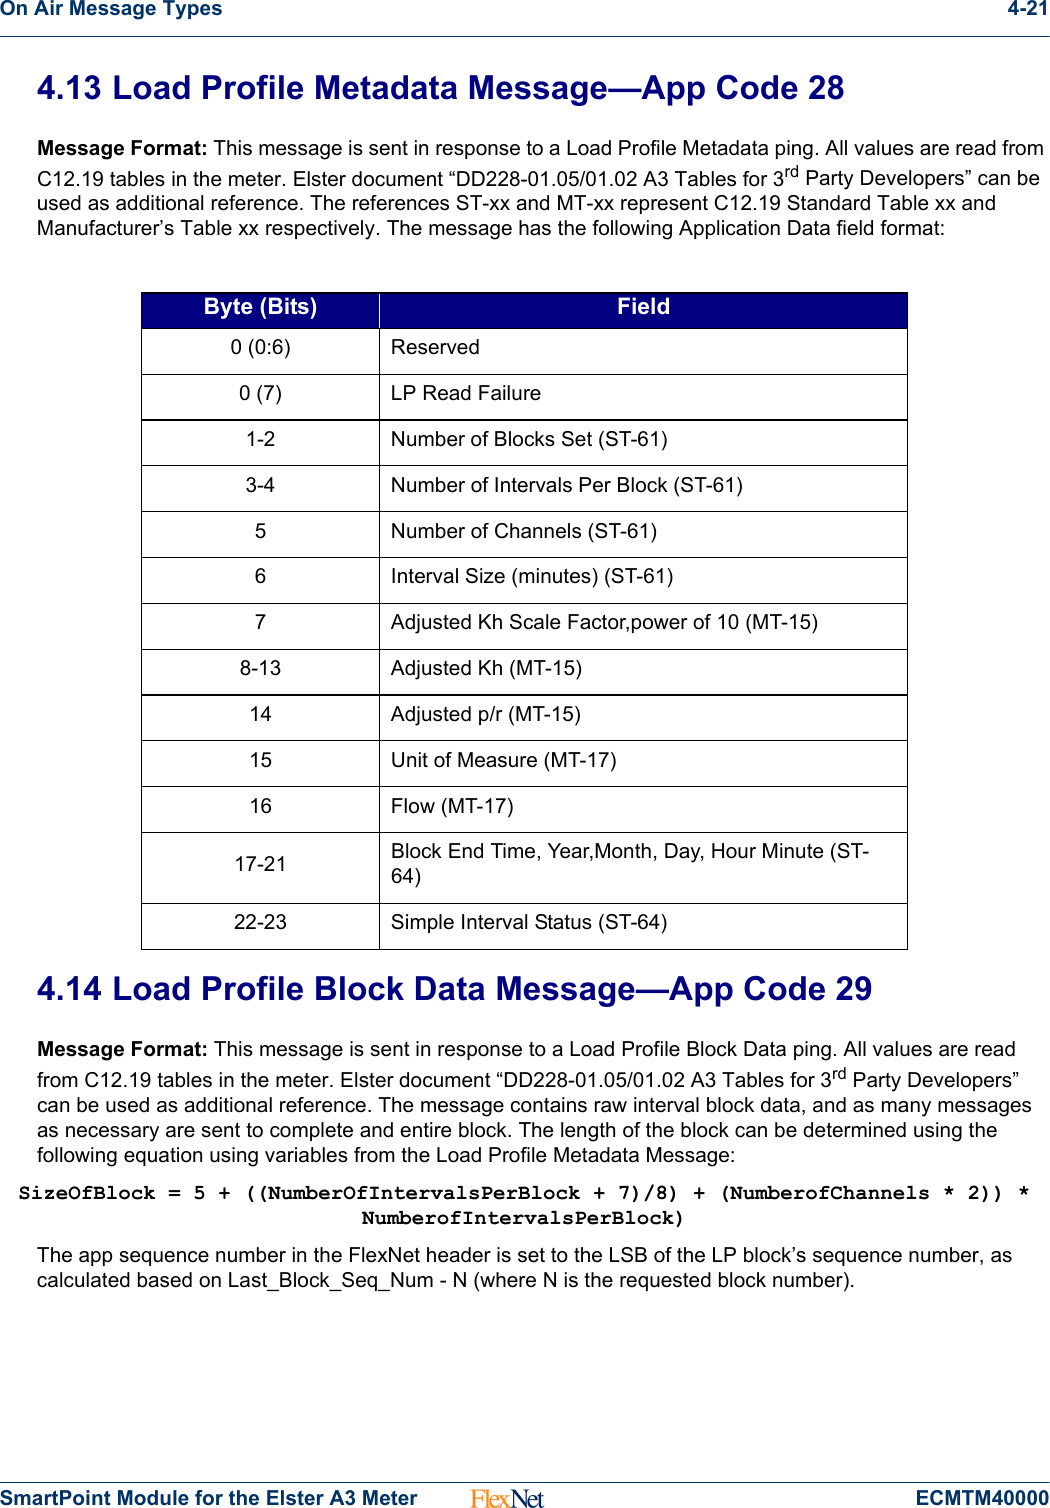 On Air Message Types 4-21SmartPoint Module for the Elster A3 Meter ECMTM400004.13 Load Profile Metadata Message—App Code 28Message Format: This message is sent in response to a Load Profile Metadata ping. All values are read from C12.19 tables in the meter. Elster document “DD228-01.05/01.02 A3 Tables for 3rd Party Developers” can be used as additional reference. The references ST-xx and MT-xx represent C12.19 Standard Table xx and Manufacturer’s Table xx respectively. The message has the following Application Data field format:4.14 Load Profile Block Data Message—App Code 29Message Format: This message is sent in response to a Load Profile Block Data ping. All values are read from C12.19 tables in the meter. Elster document “DD228-01.05/01.02 A3 Tables for 3rd Party Developers” can be used as additional reference. The message contains raw interval block data, and as many messages as necessary are sent to complete and entire block. The length of the block can be determined using the following equation using variables from the Load Profile Metadata Message:SizeOfBlock = 5 + ((NumberOfIntervalsPerBlock + 7)/8) + (NumberofChannels * 2)) * NumberofIntervalsPerBlock)The app sequence number in the FlexNet header is set to the LSB of the LP block’s sequence number, as calculated based on Last_Block_Seq_Num - N (where N is the requested block number).Byte (Bits) Field0 (0:6) Reserved0 (7) LP Read Failure1-2 Number of Blocks Set (ST-61)3-4 Number of Intervals Per Block (ST-61)5 Number of Channels (ST-61)6 Interval Size (minutes) (ST-61)7 Adjusted Kh Scale Factor,power of 10 (MT-15)8-13 Adjusted Kh (MT-15)14 Adjusted p/r (MT-15)15 Unit of Measure (MT-17)16 Flow (MT-17)17-21 Block End Time, Year,Month, Day, Hour Minute (ST-64)22-23 Simple Interval Status (ST-64)